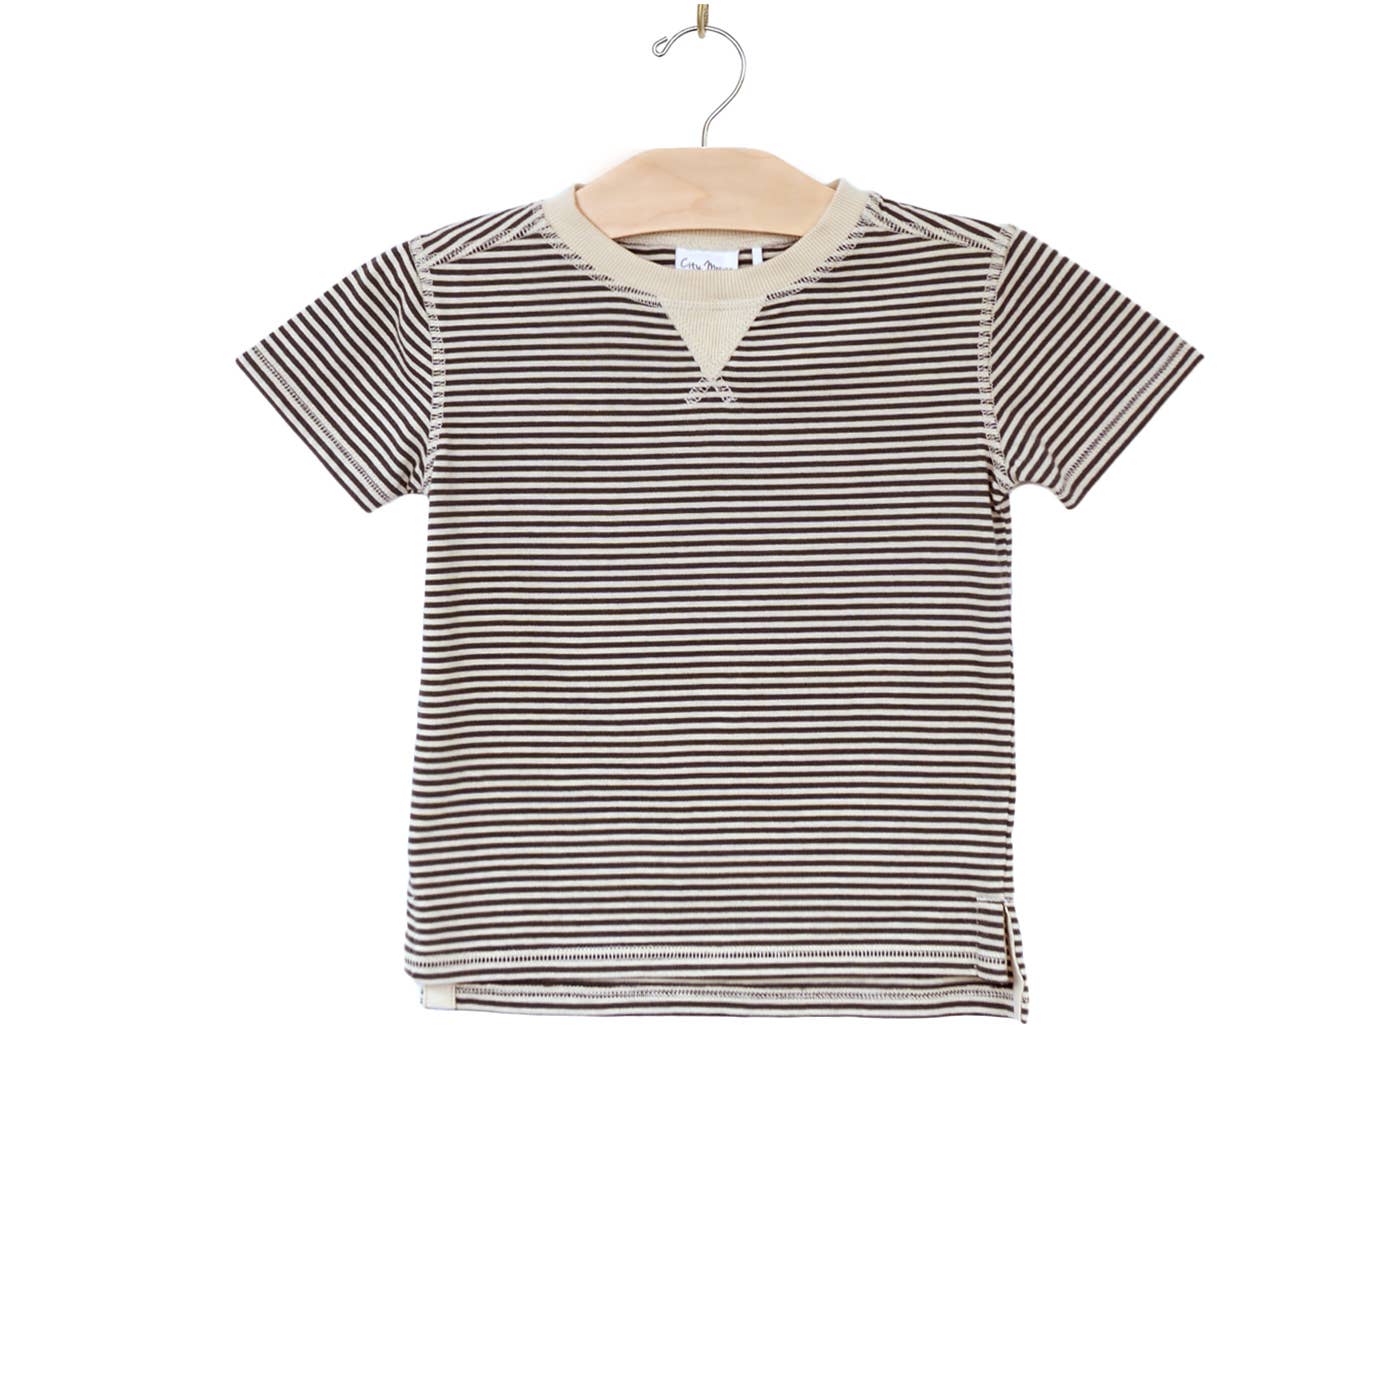 Whistle Patch Tee- Stripes